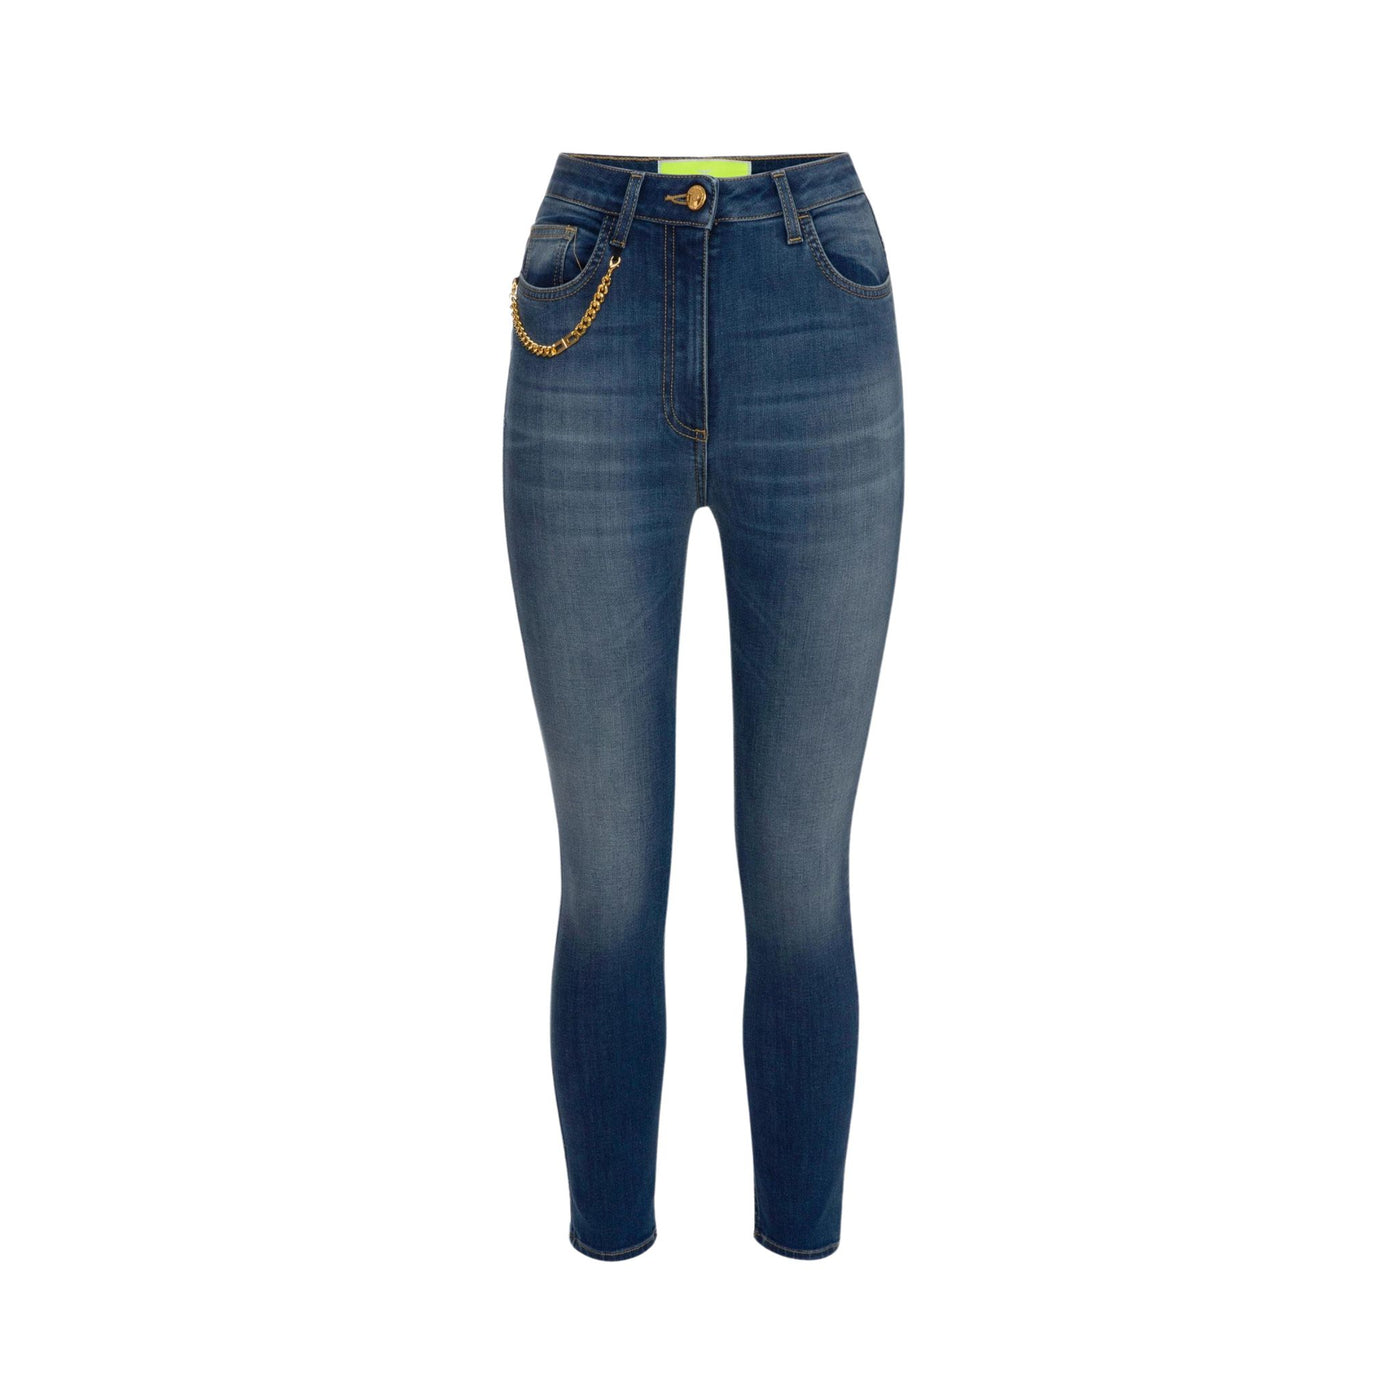 Women's jeans with metal chain